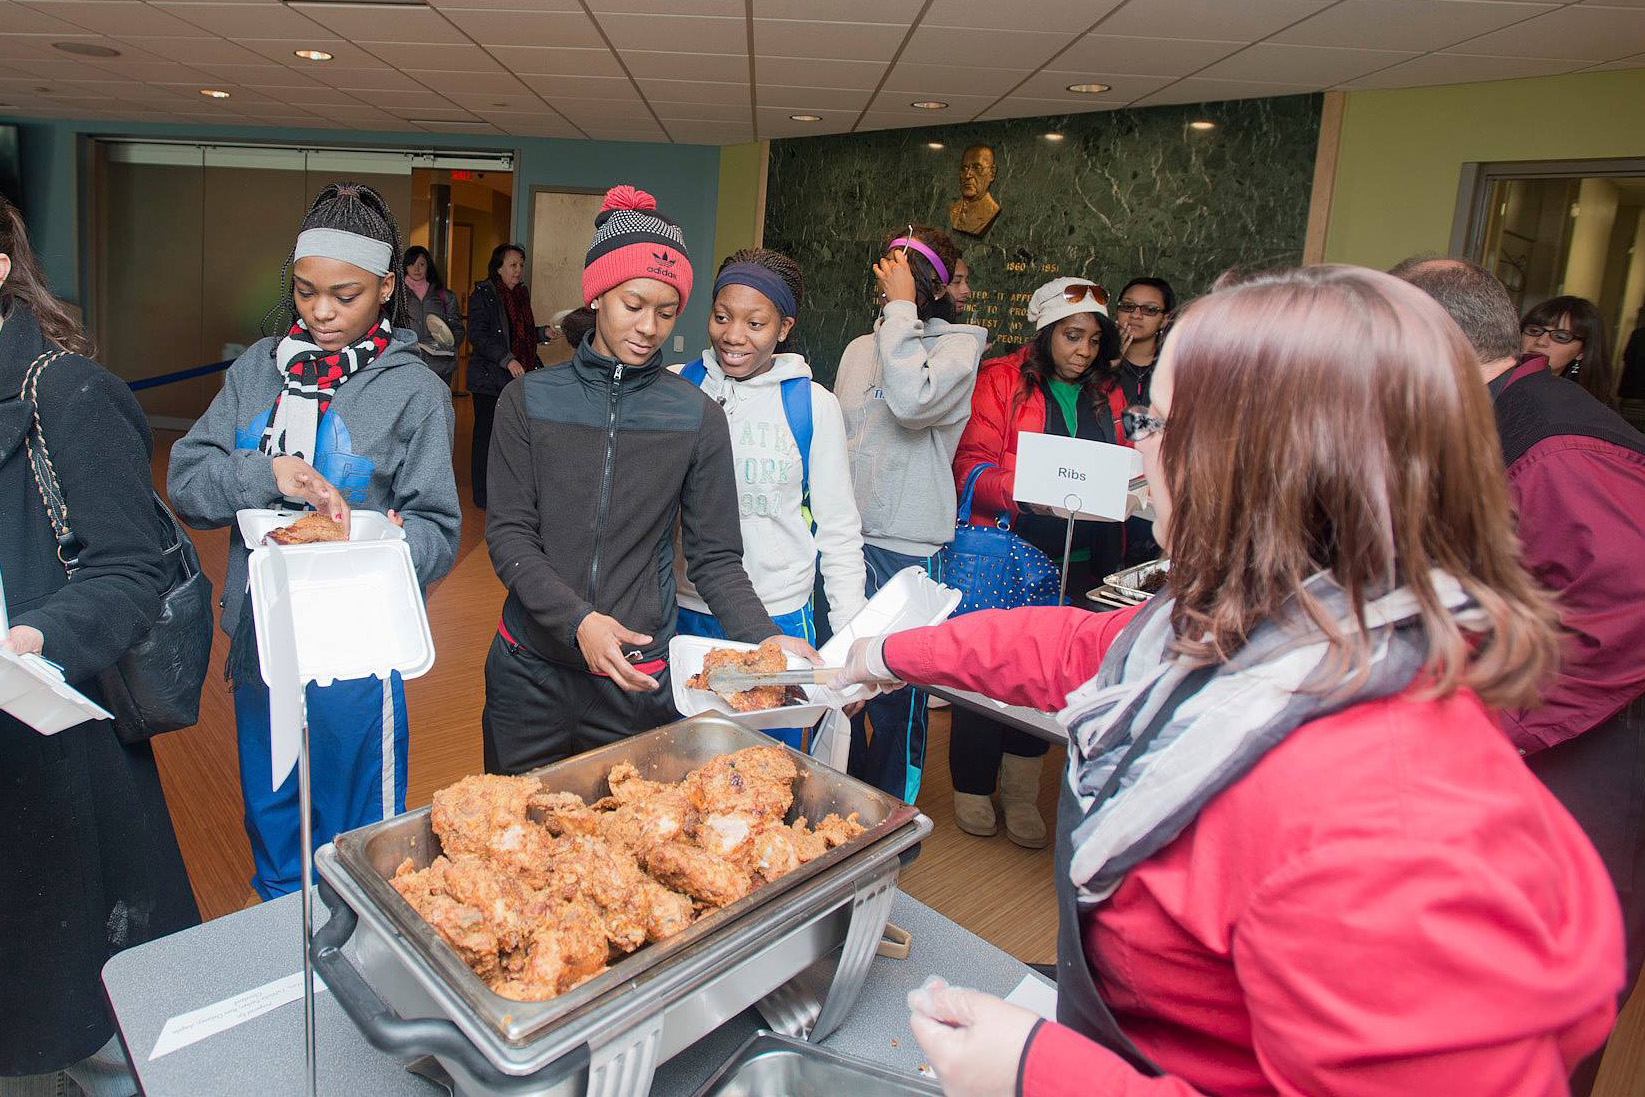 Attendees go through the food line at one of KCC's annual Soul Food Luncheon events.